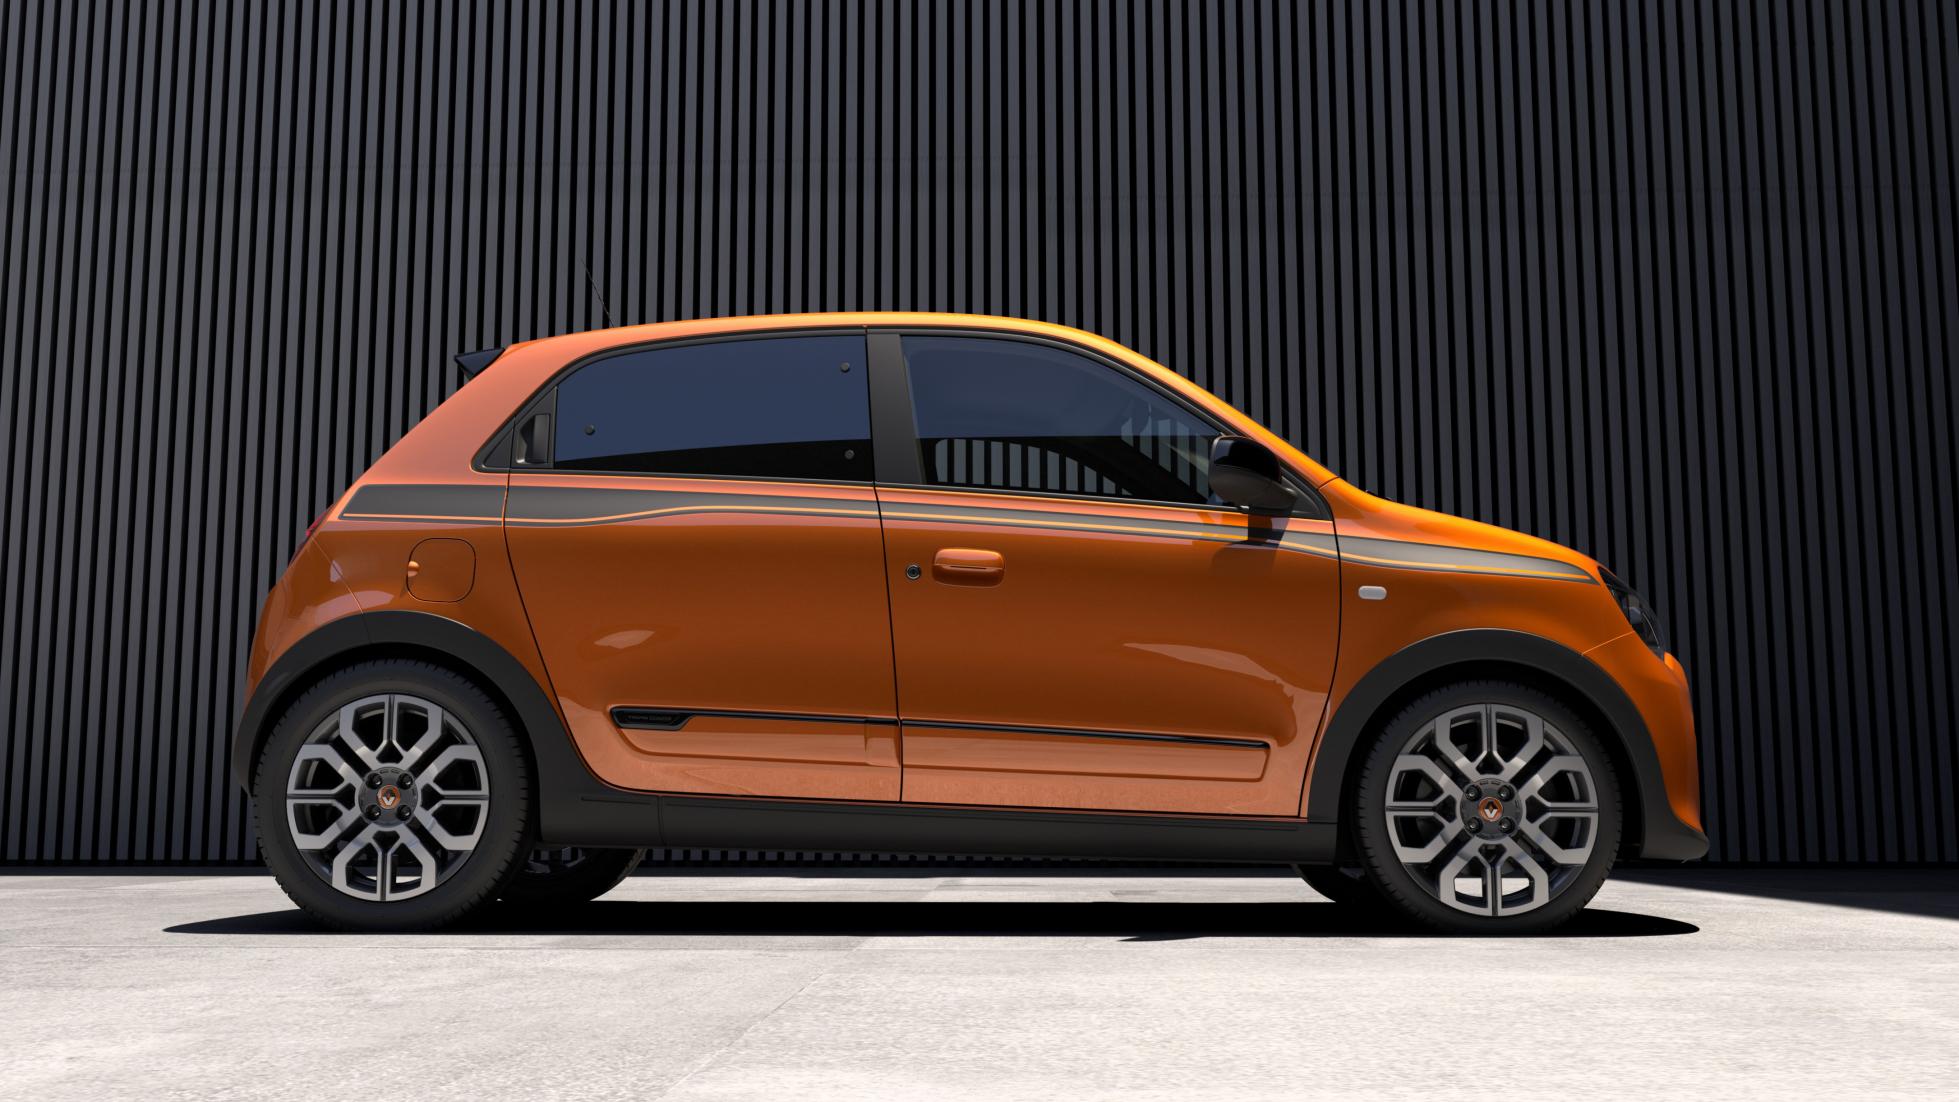 Renault Twingo GT 2016 side view